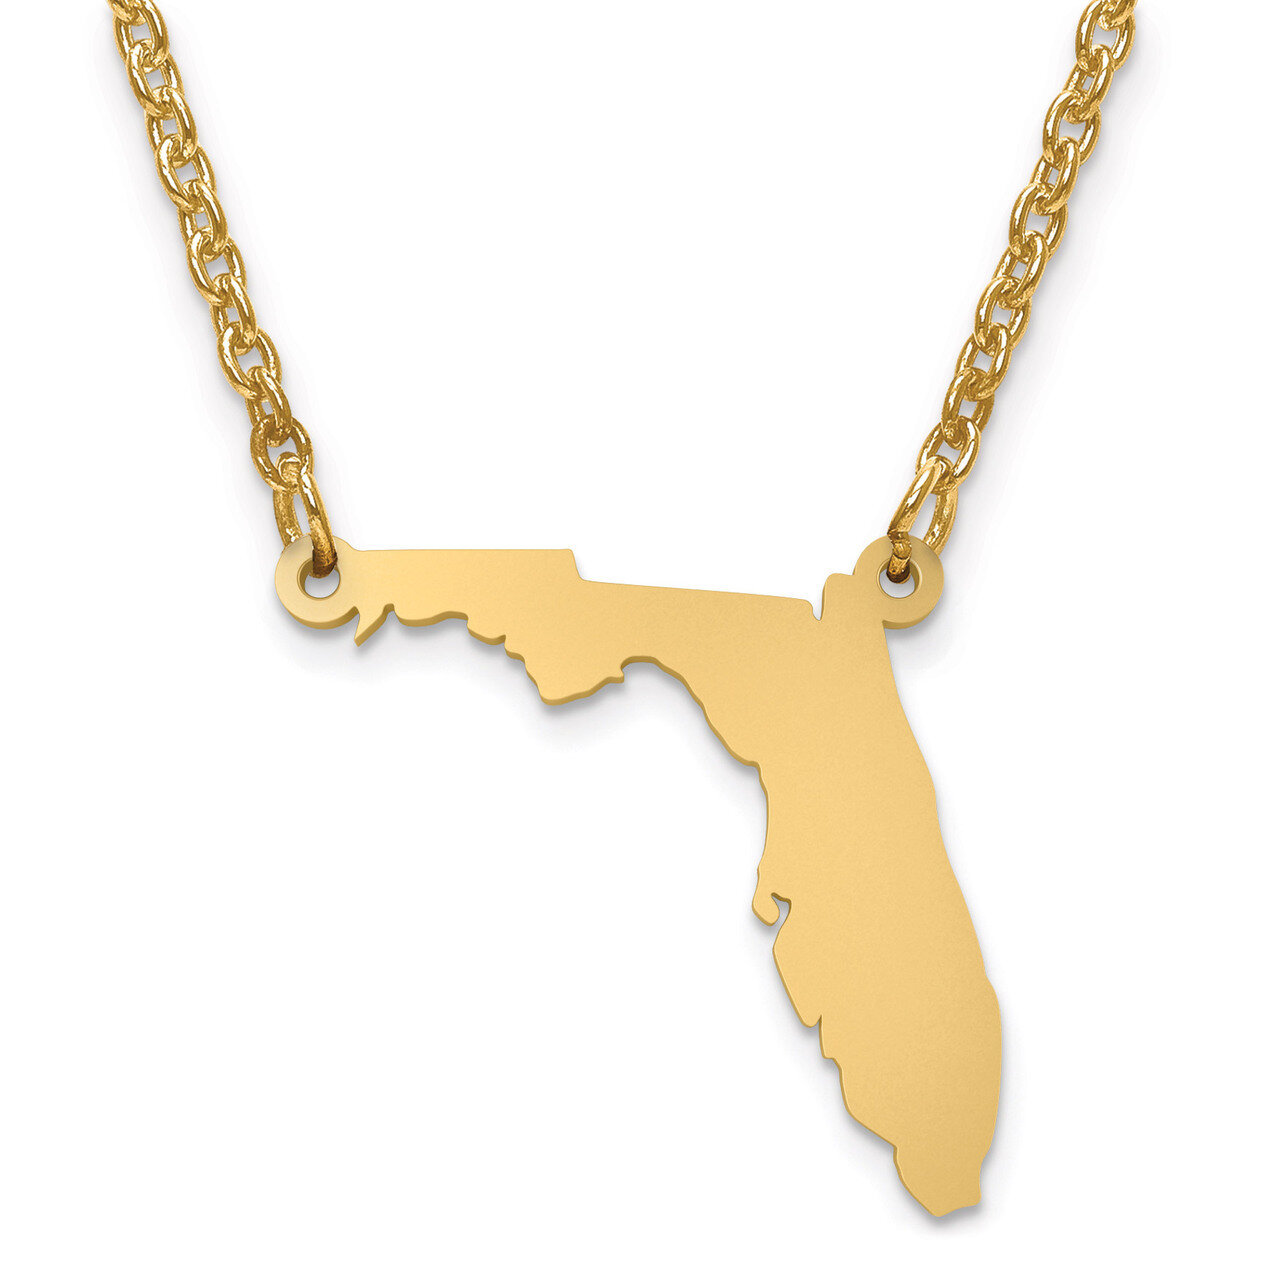 Florida State Pendant with Chain Engravable Gold-plated on Sterling Silver